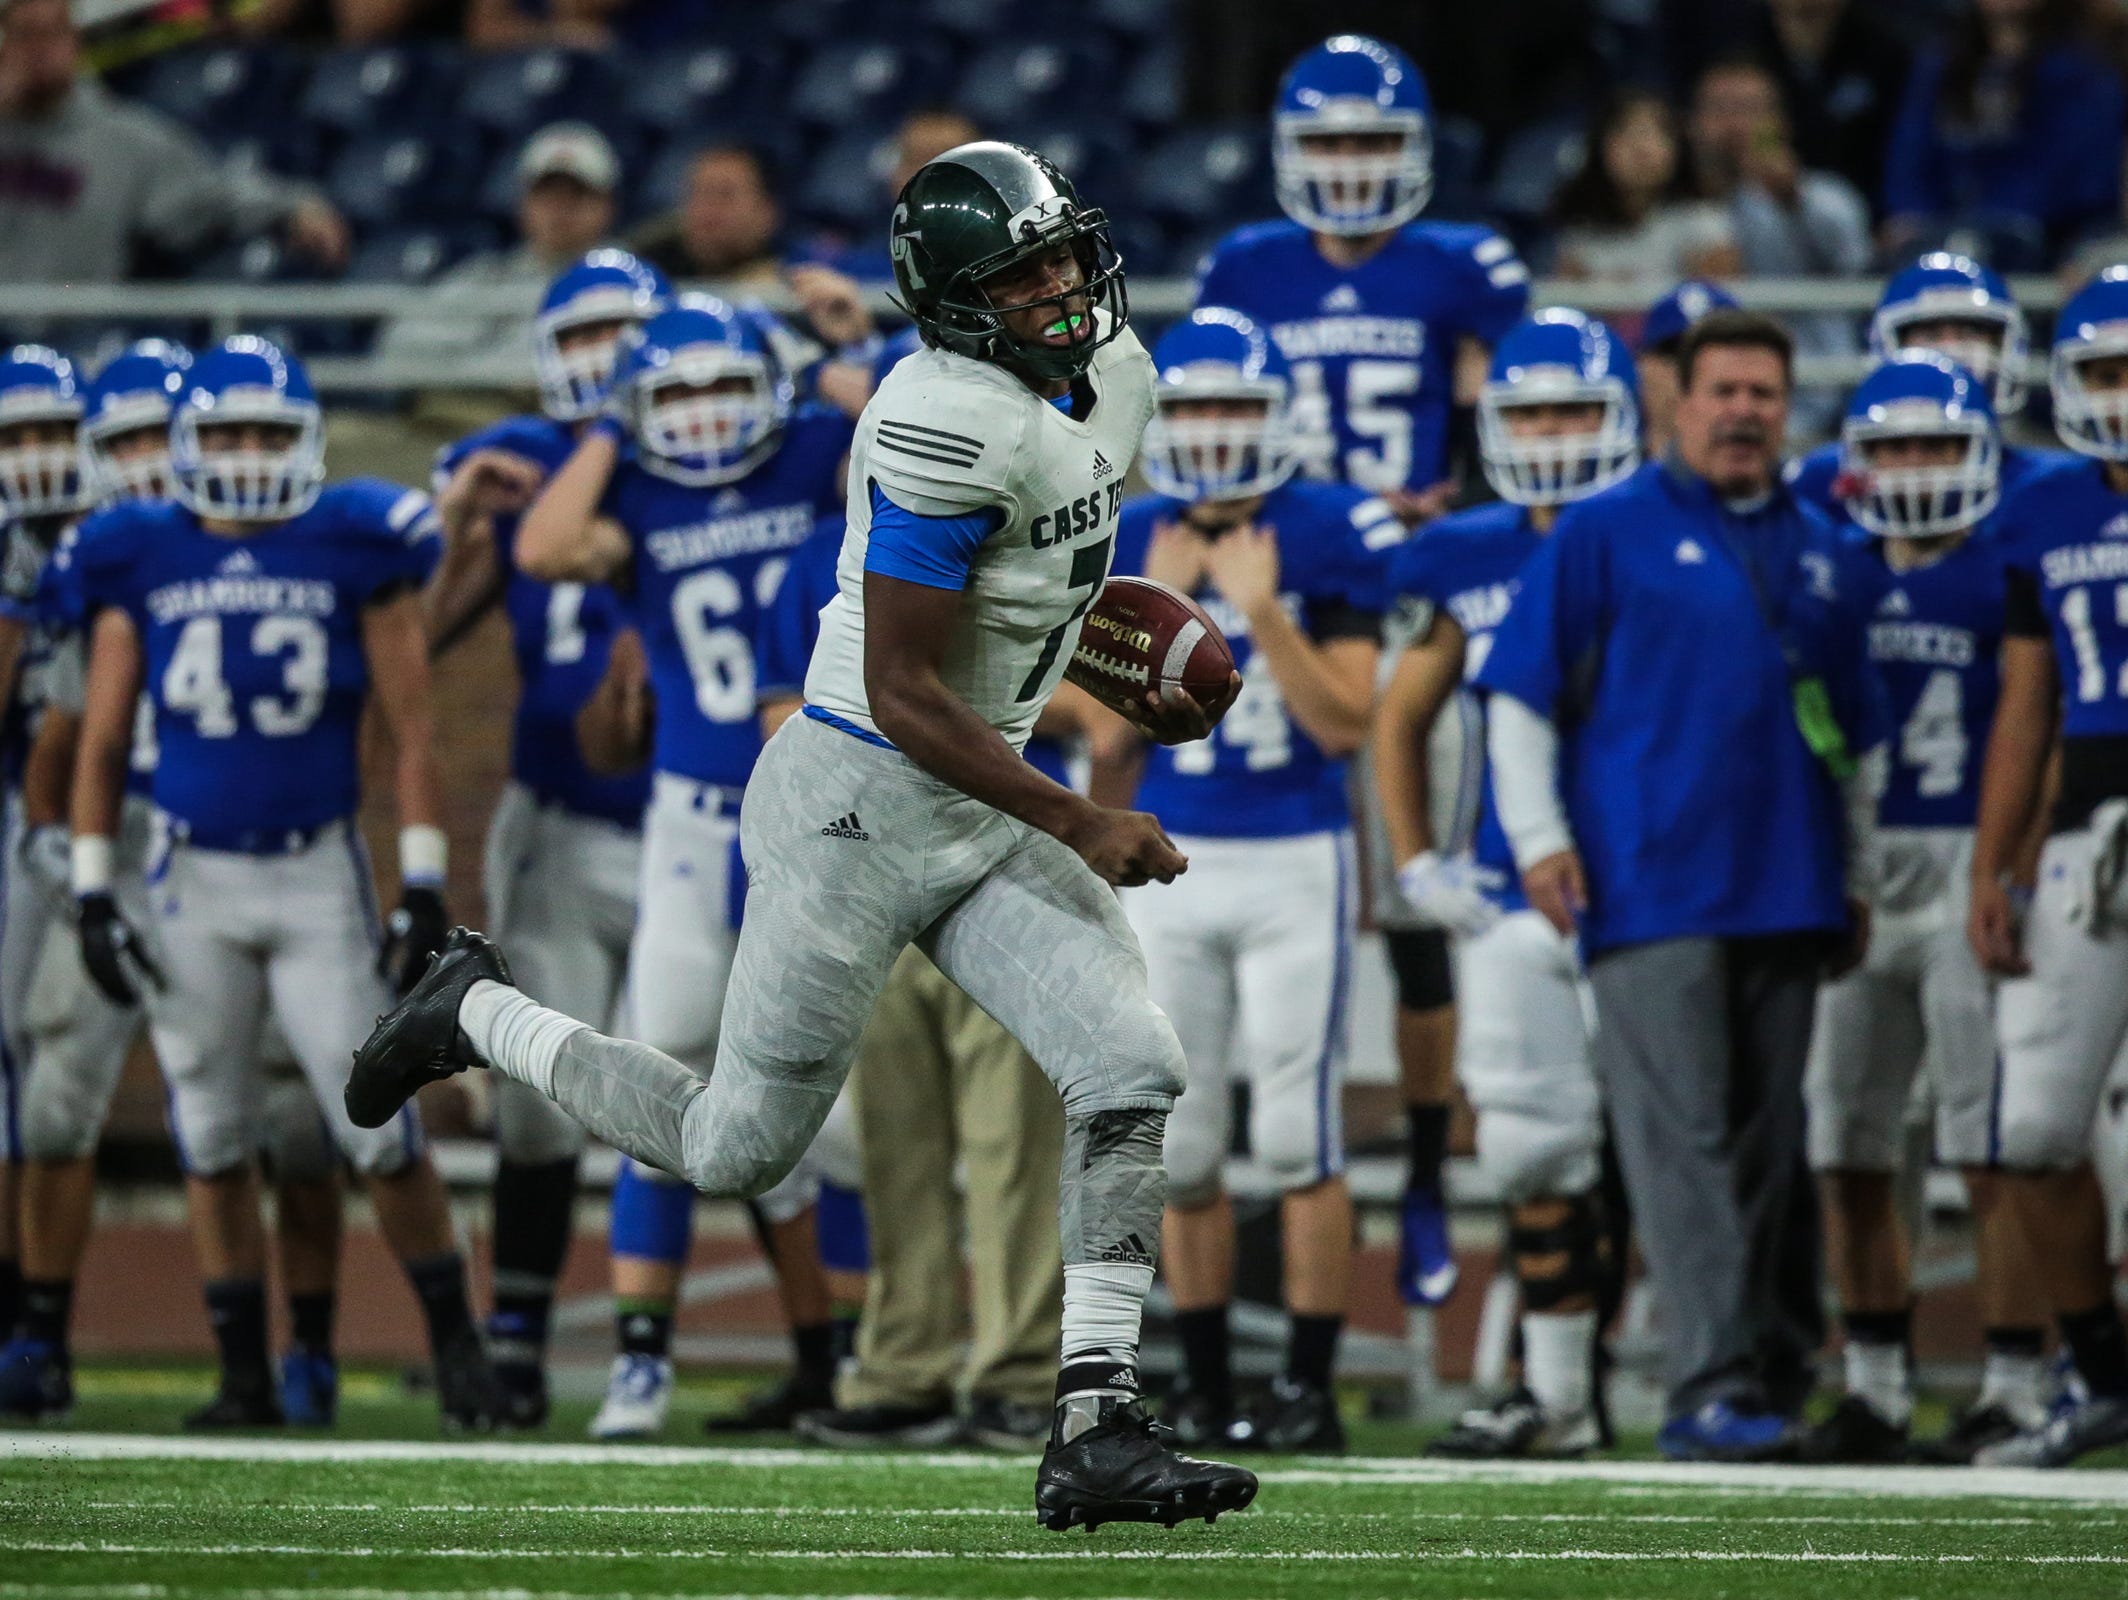 Detroit Cass Tech's Hall Rodney (7) runs the ball against Detroit Catholic Central during the Division 1 High School Championship game on Saturday November 26, 2016, at Ford Field in Detroit, MI.